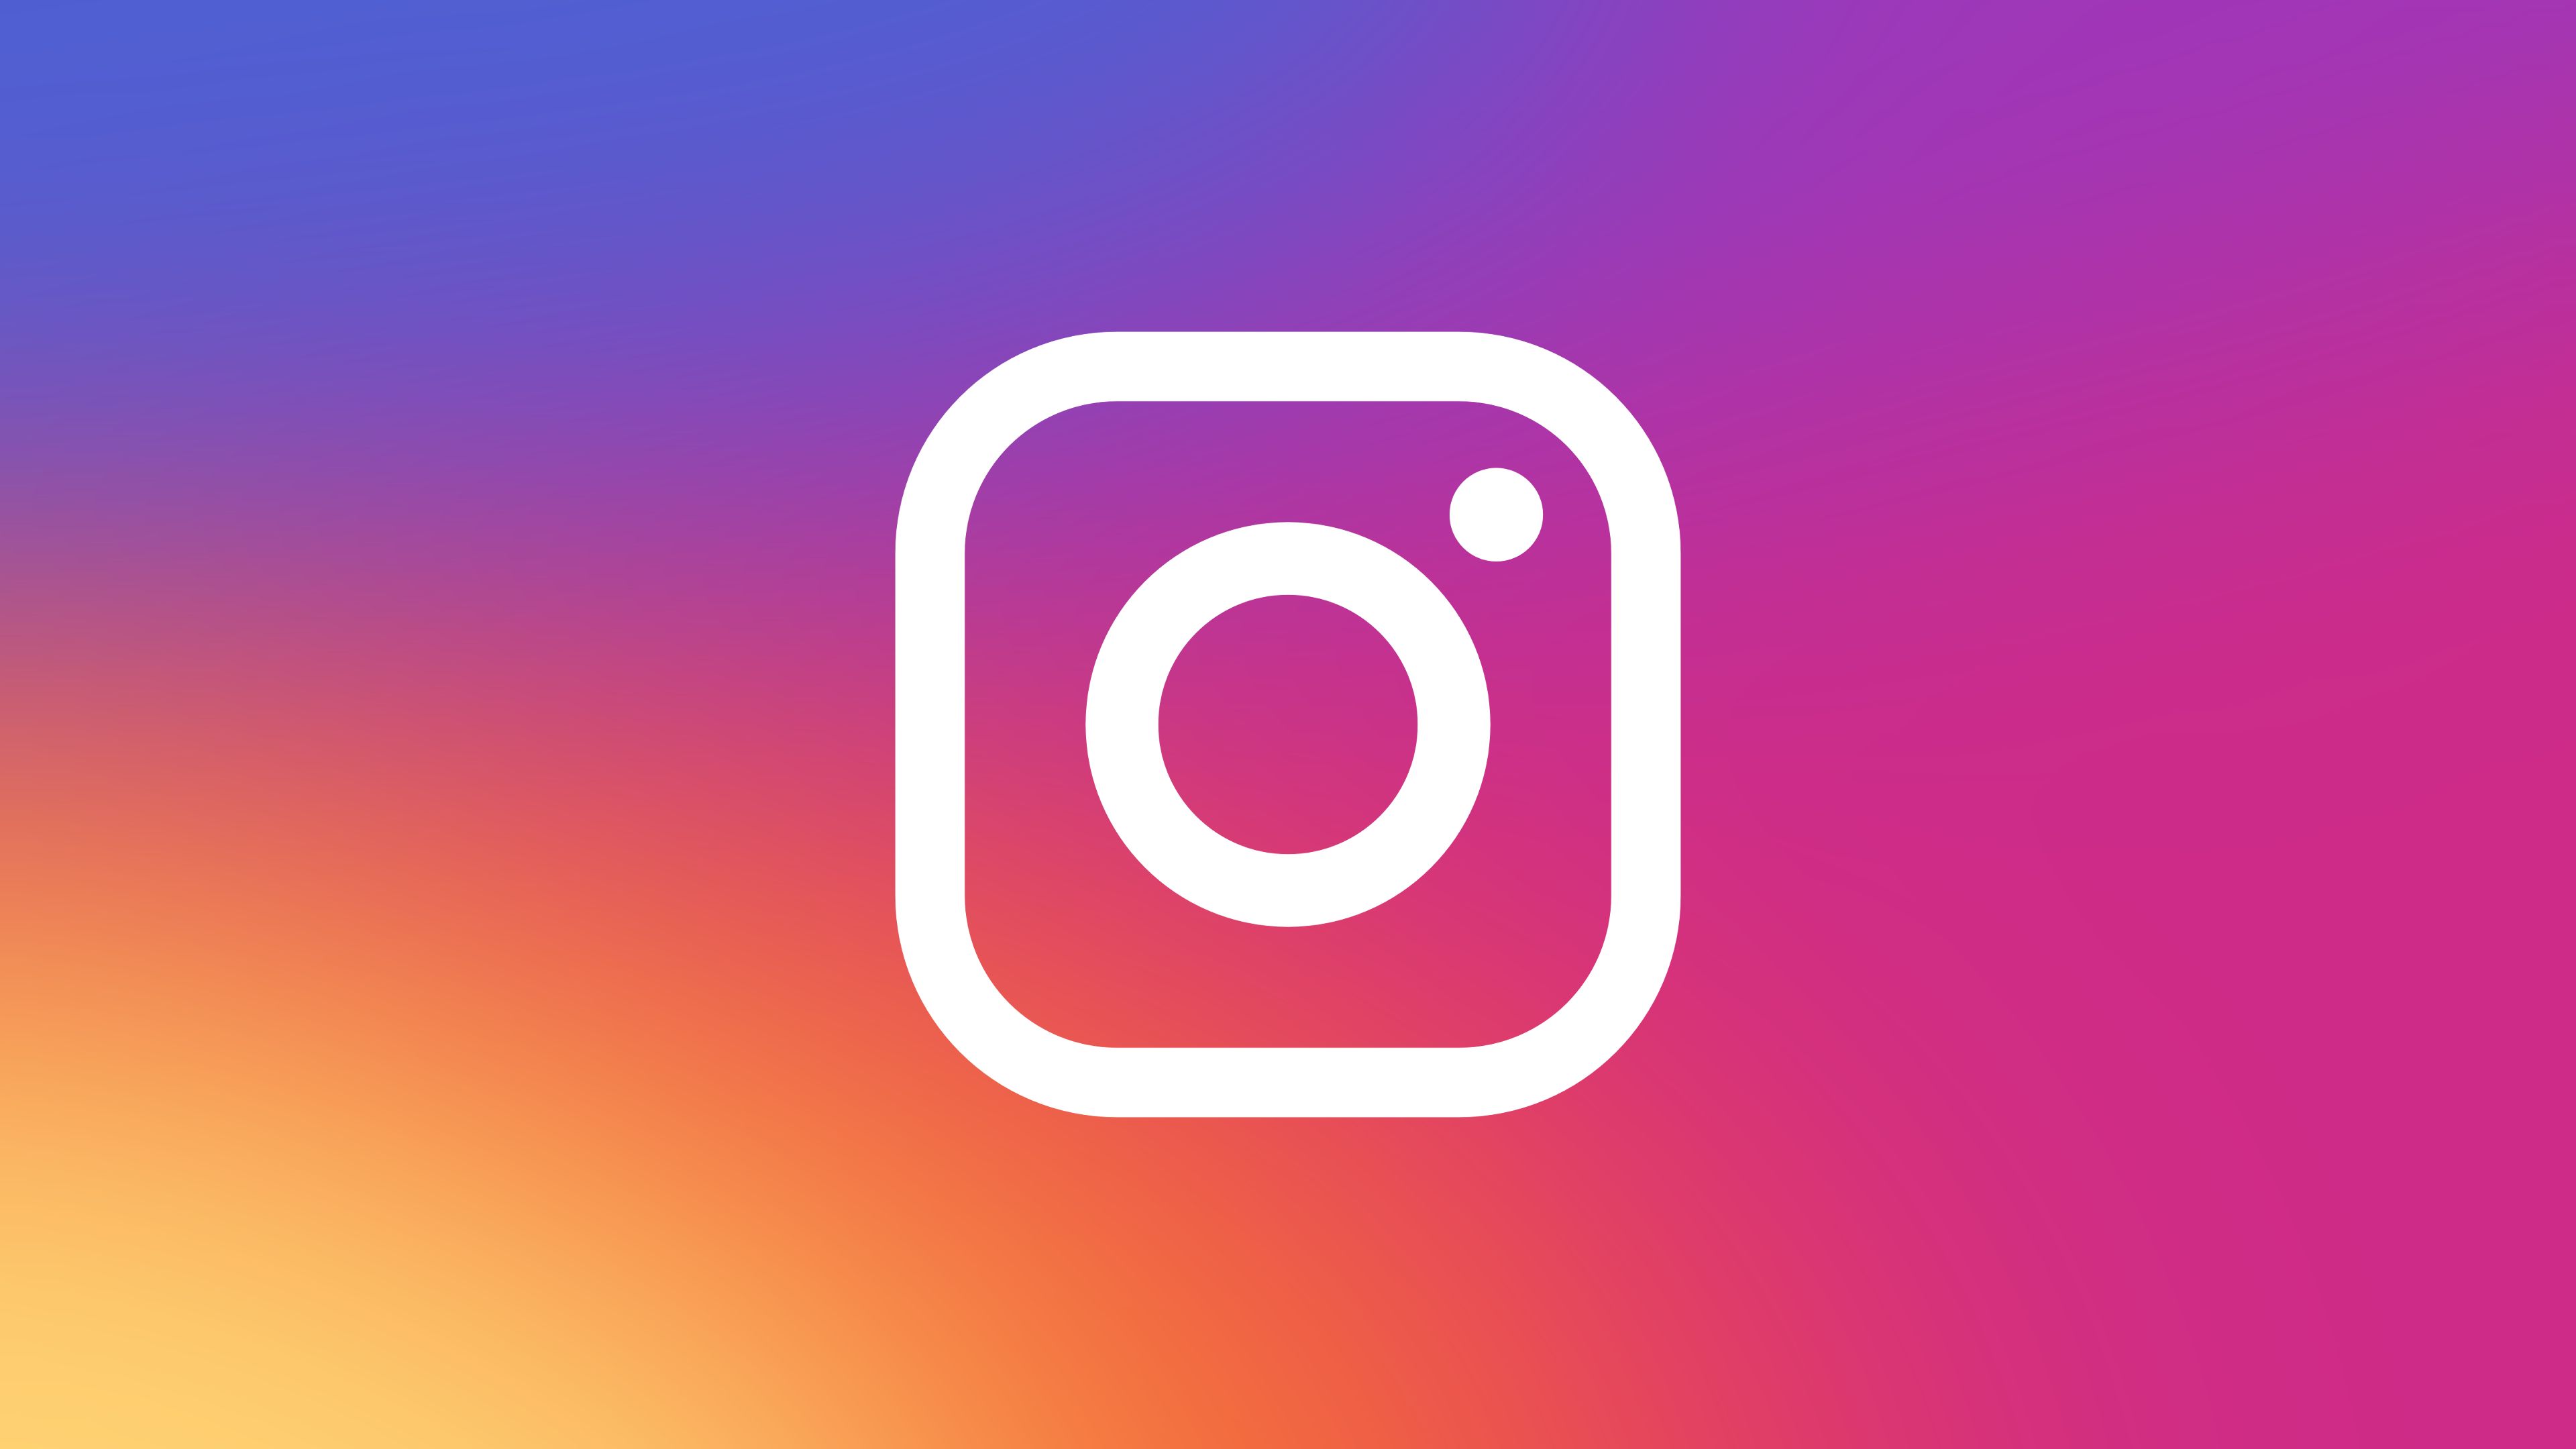 Instagram 4k, HD Logo, 4k Wallpaper, Image, Background, Photo and Picture